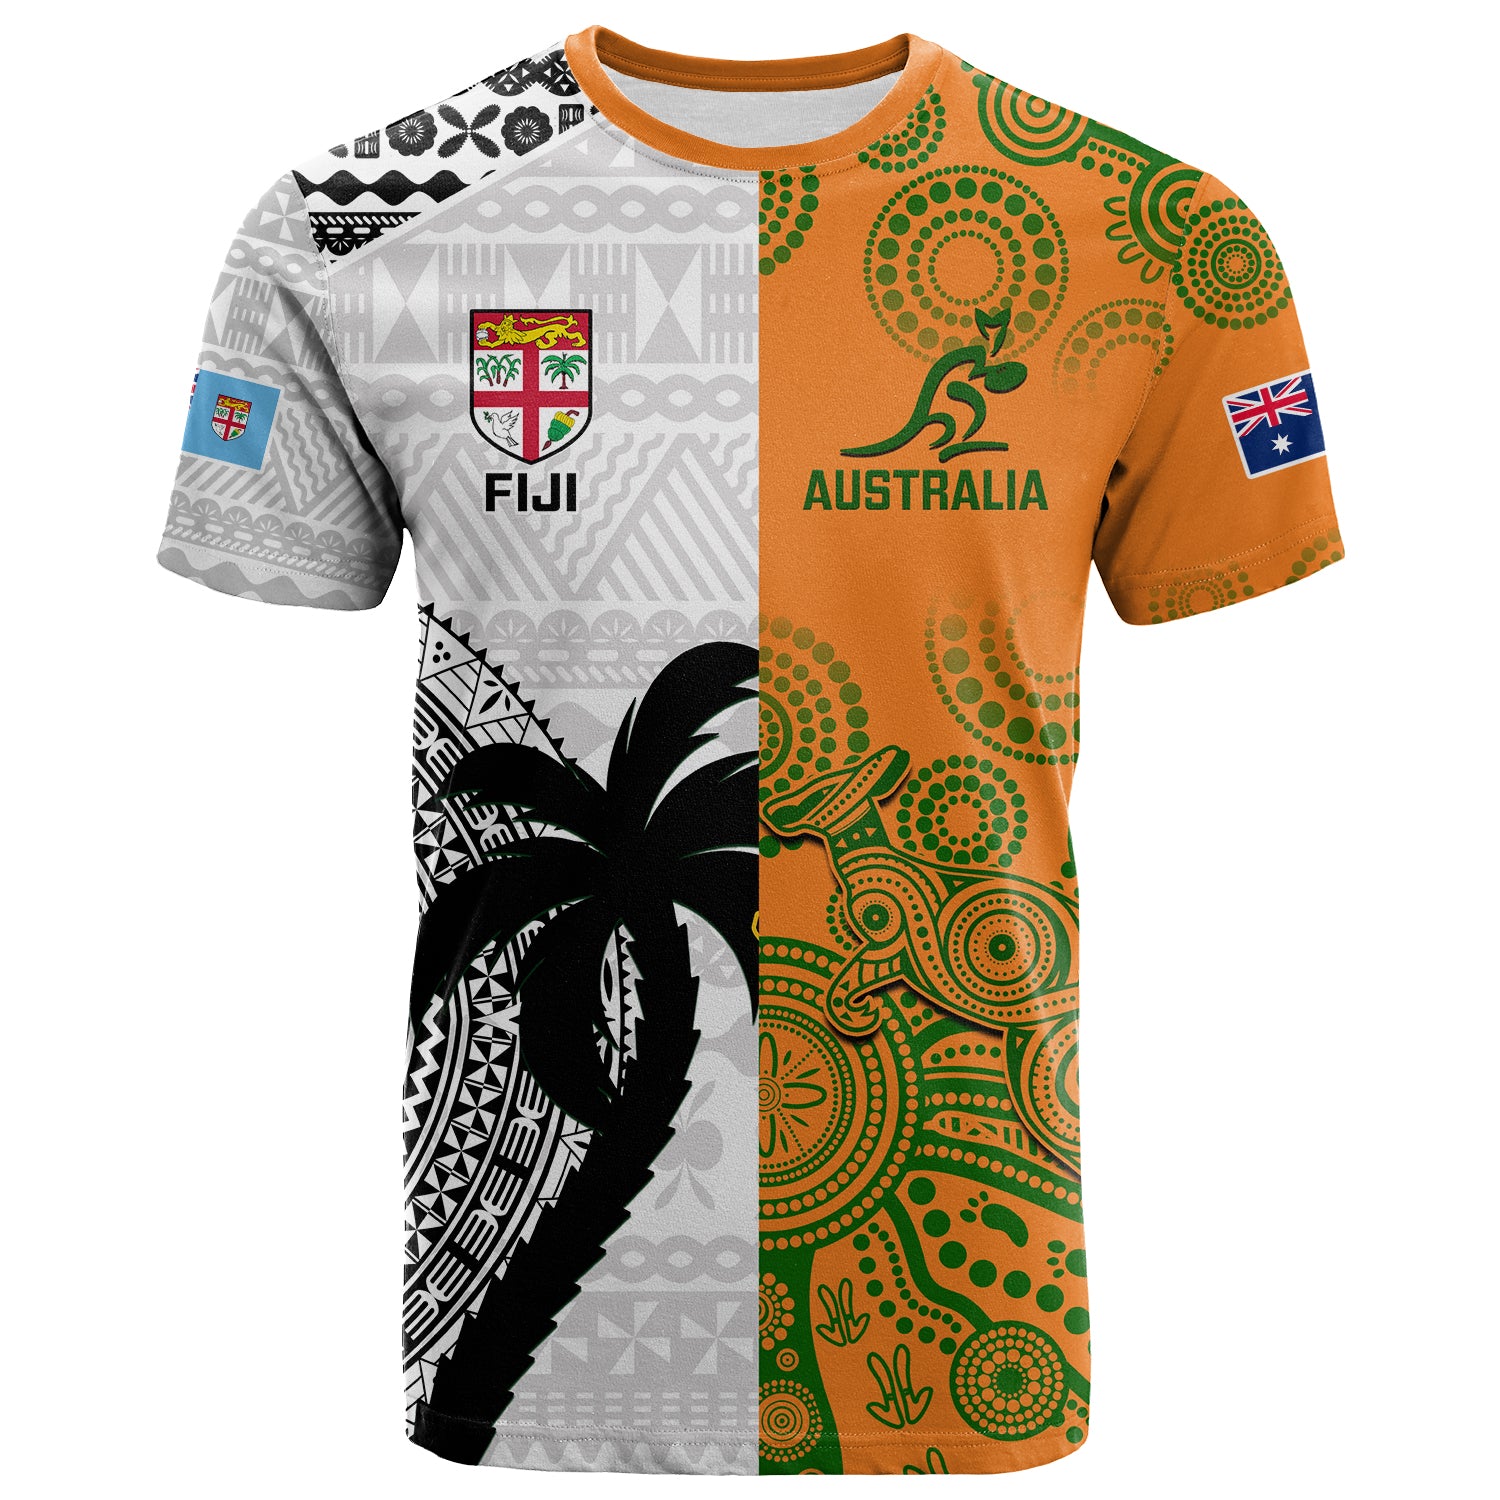 Fiji And Australia Rugby T Shirt World Cup 2023 Together LT14 Gold - Polynesian Pride